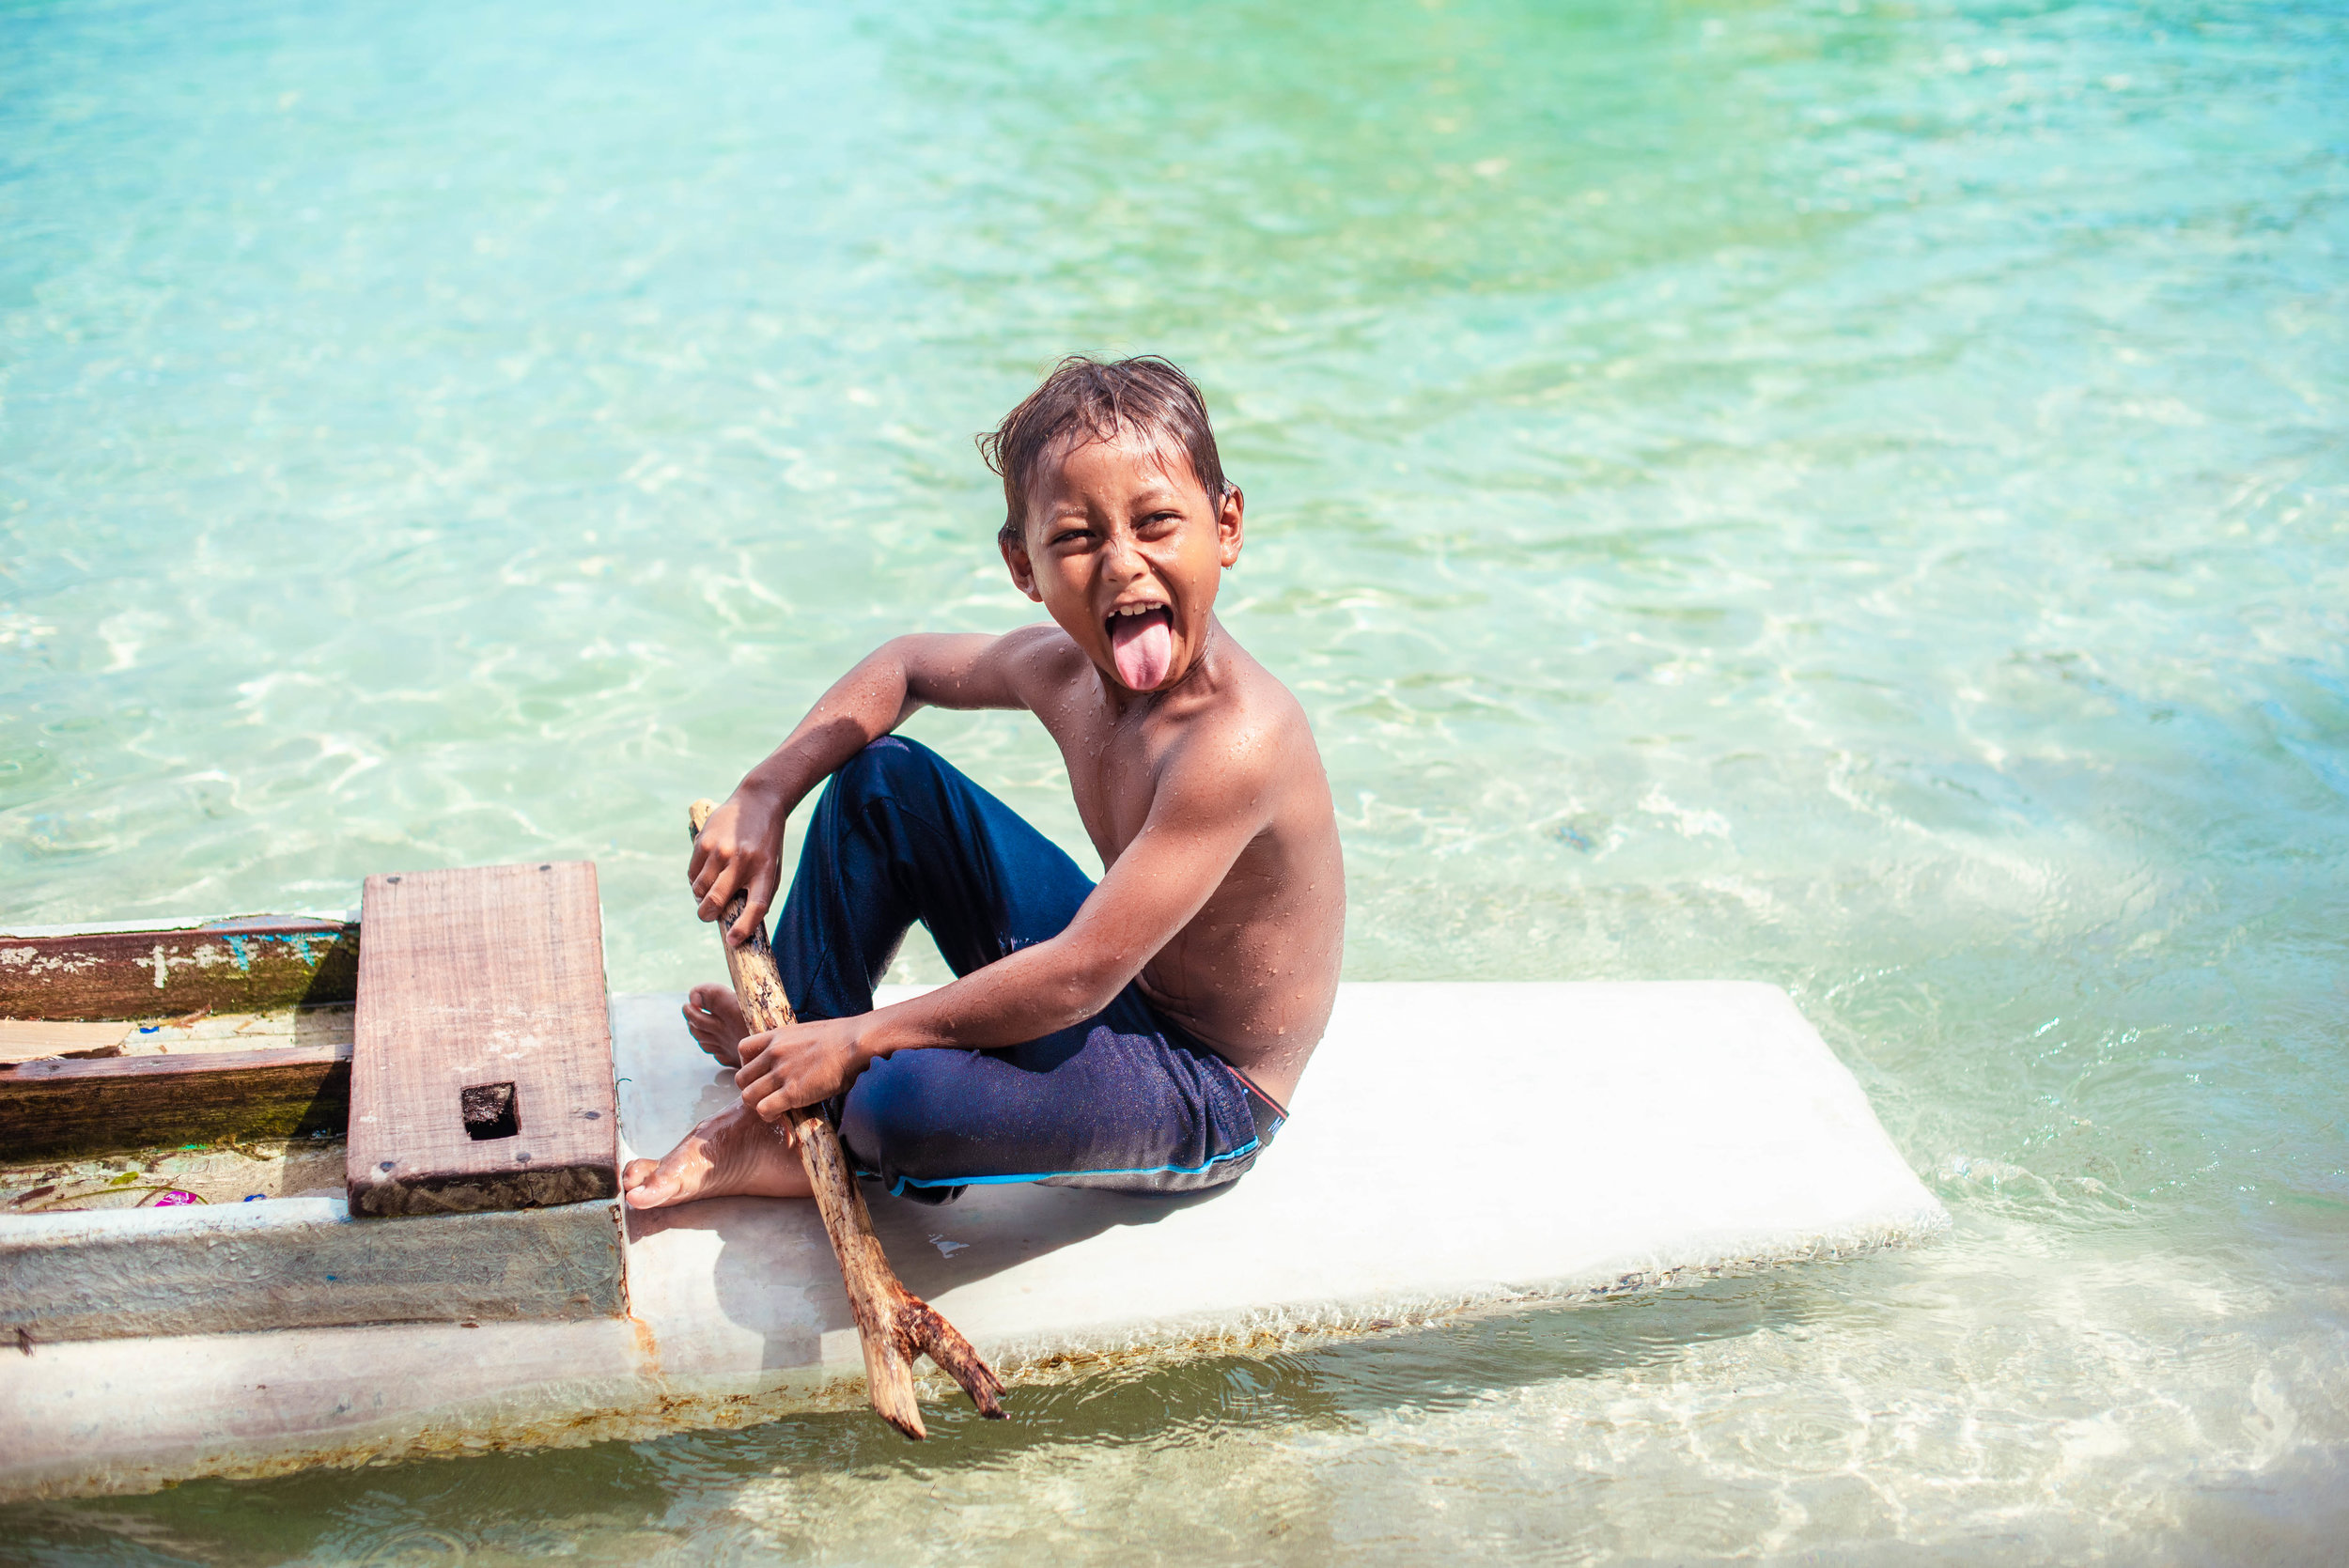  A young boy plays on a paddleboard on a small island in Indonesia. (Image:  Fran Cresswell ) 